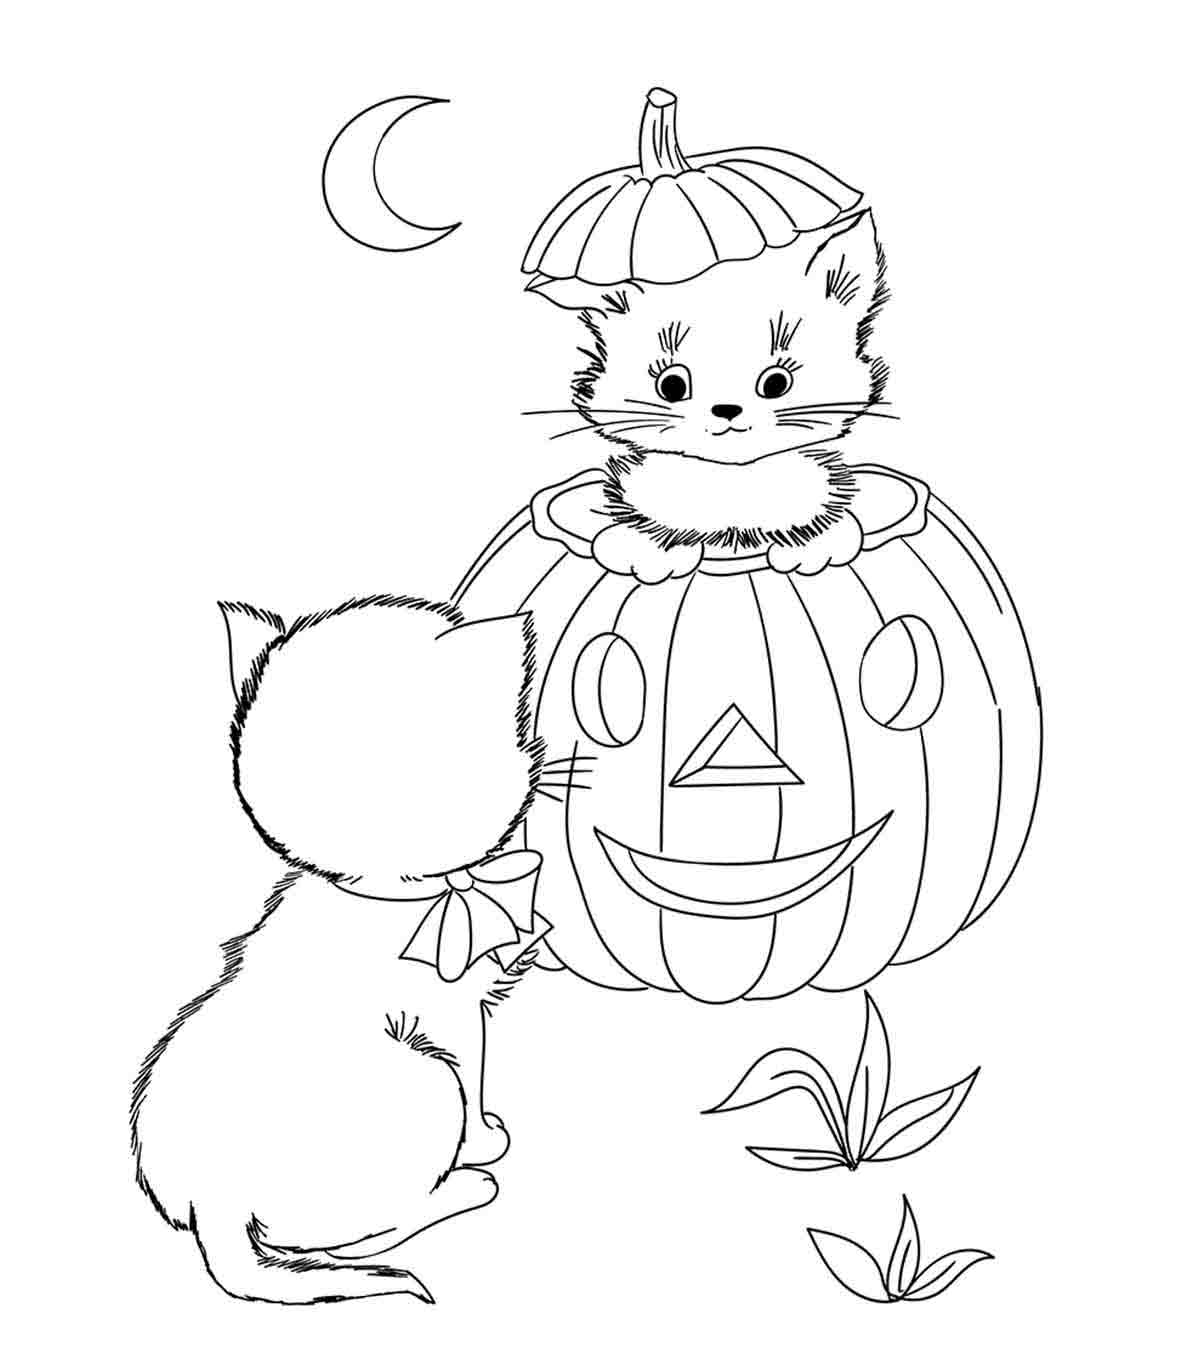 25 Amazing Disney Halloween Coloring Pages For Your Little Ones_image